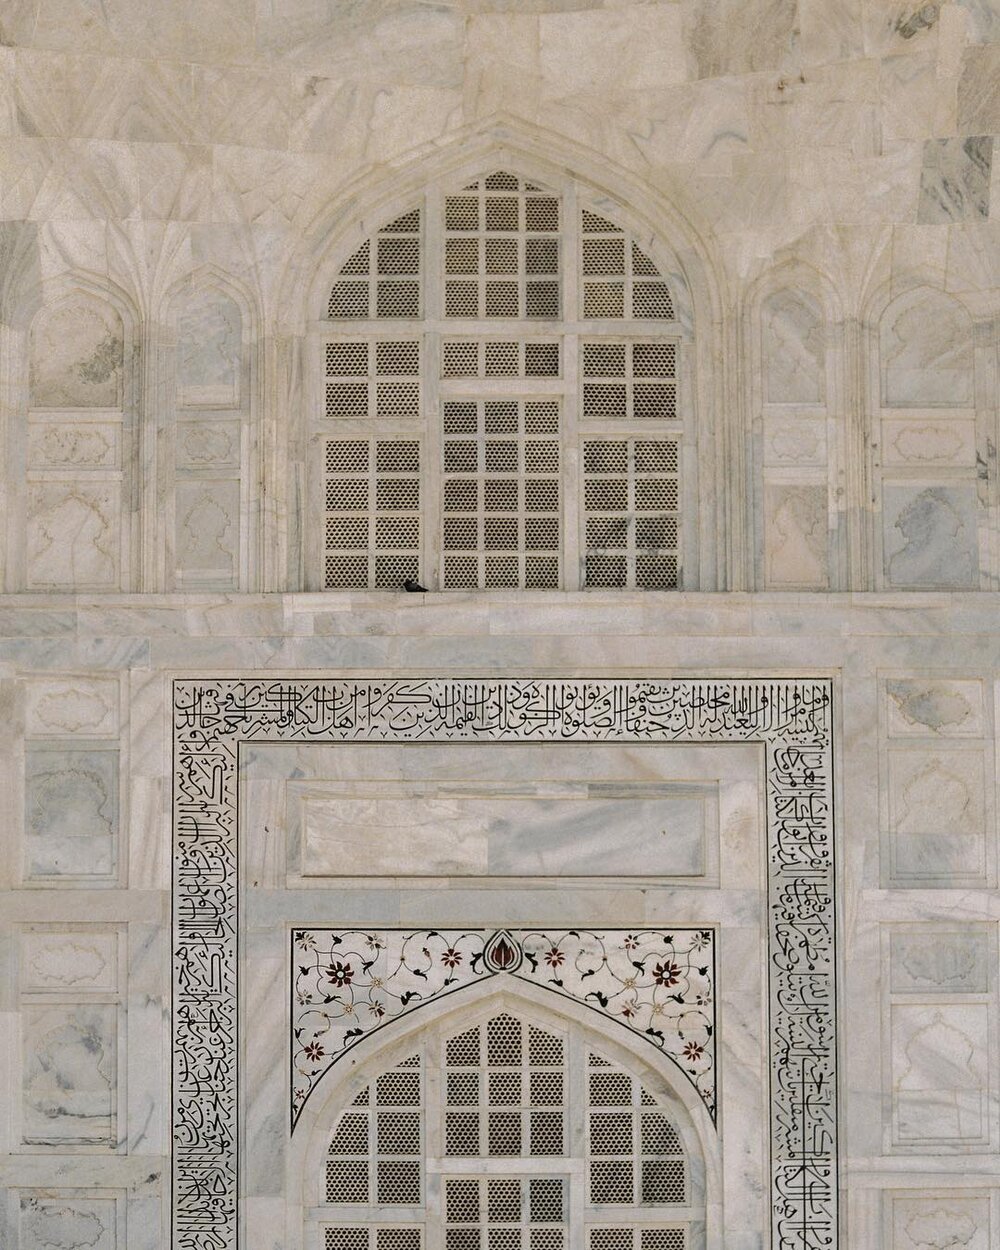 Close-up of the architectural details on the Taj Mahal. Photo: @inbedwith.me